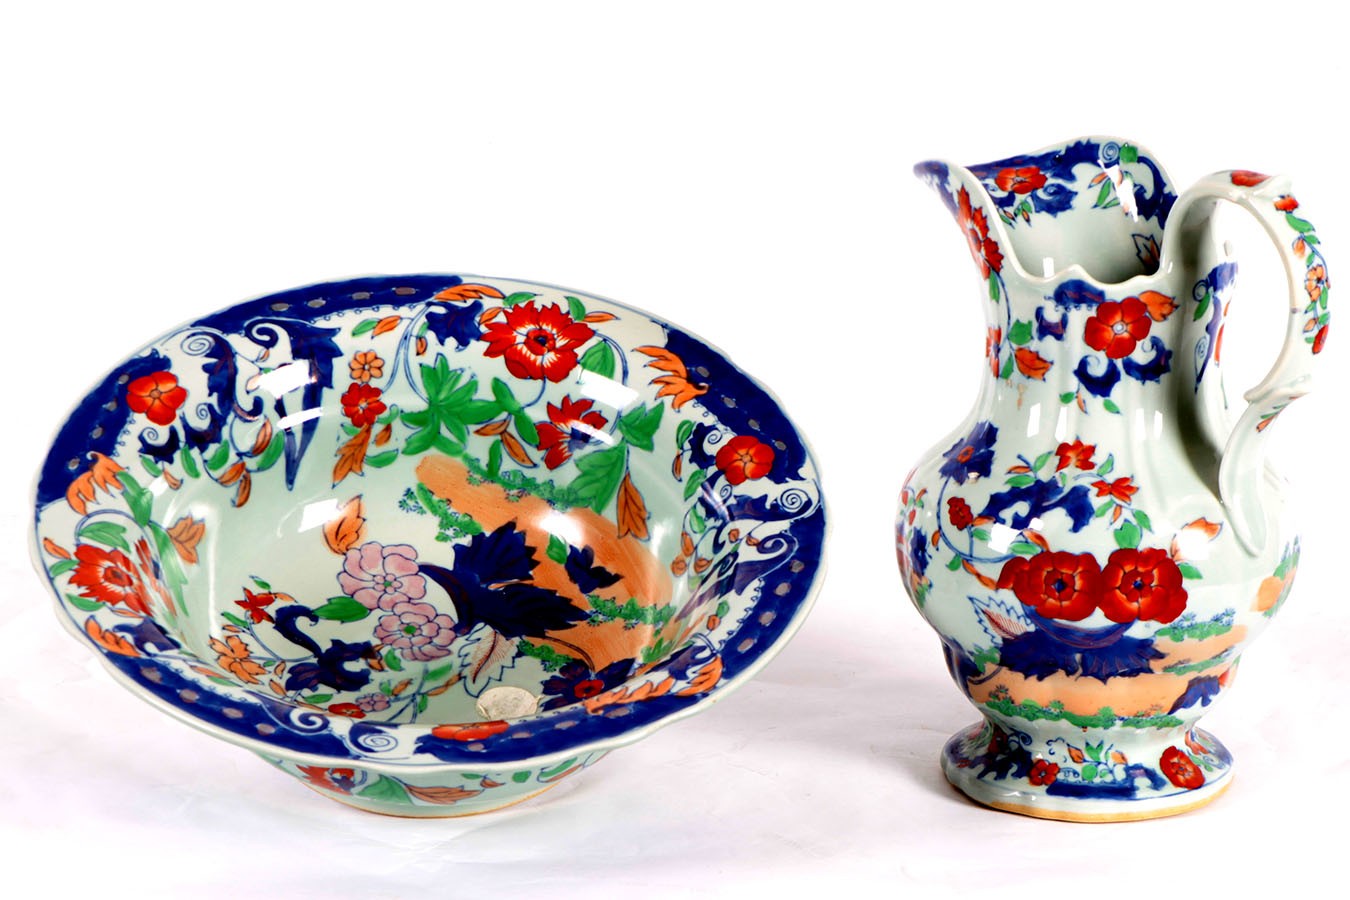 Antique English jug and basin from 1900 in porcelain with chinoiserie decorations